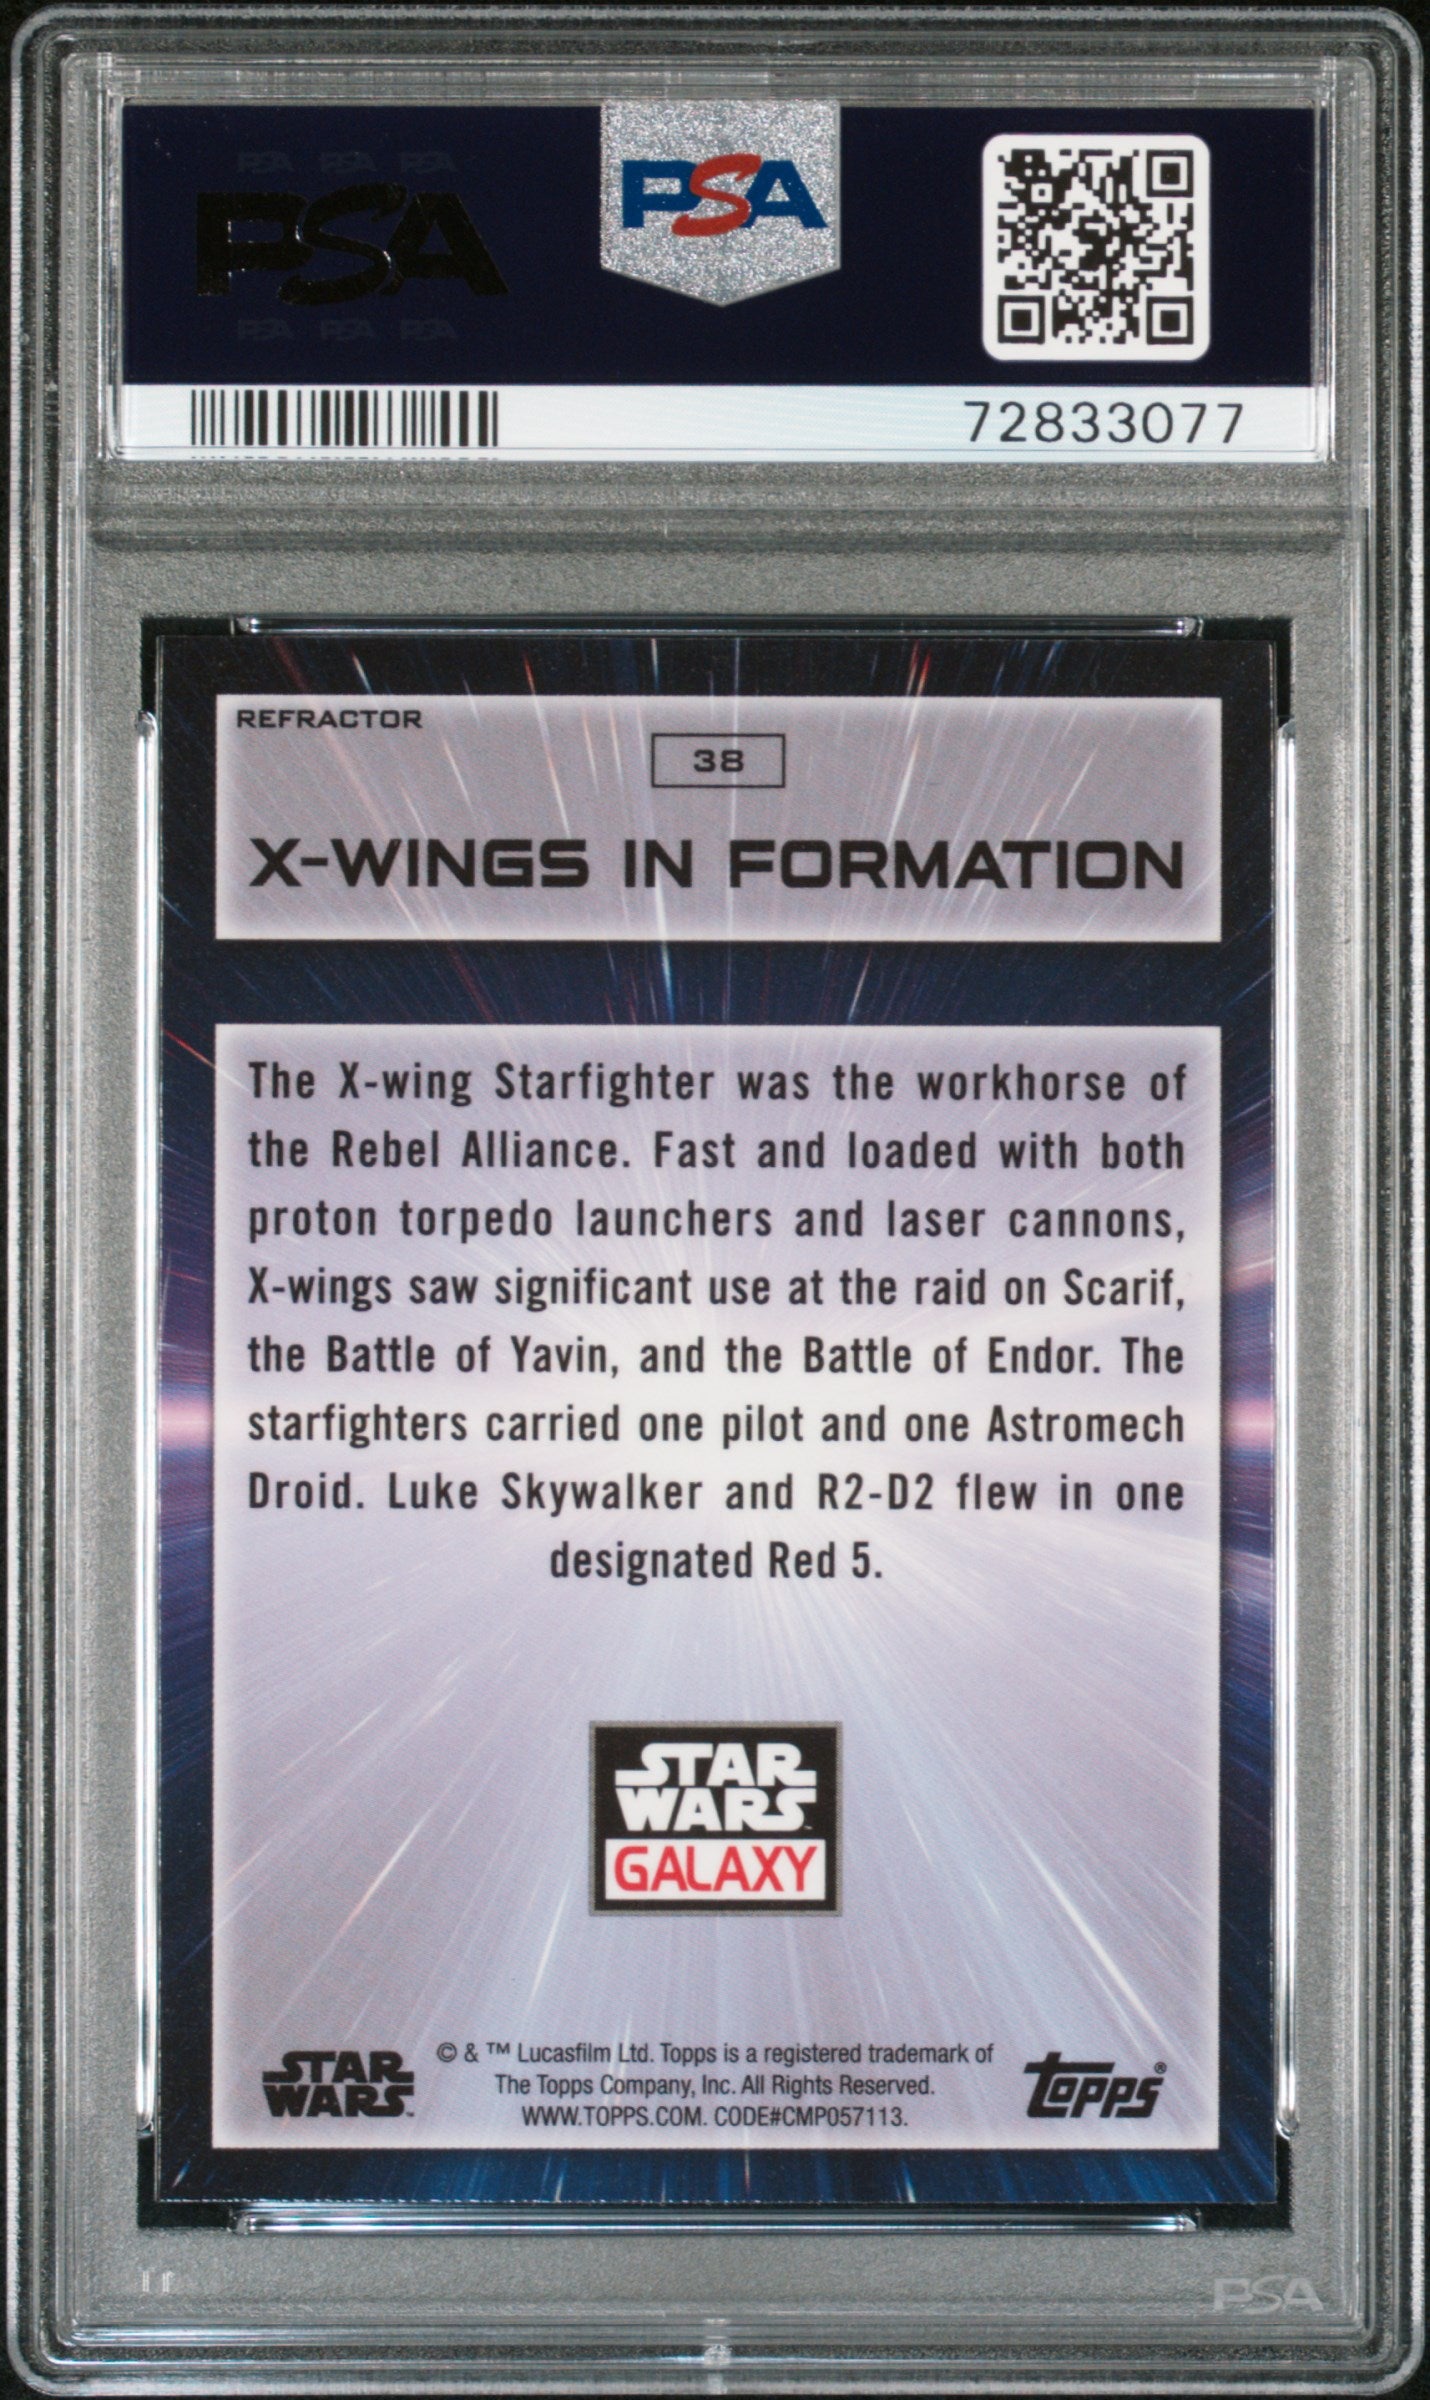 2022 Topps Chrome Star Wars Galaxy 38 X-wings In Formation Refractor Psa 9